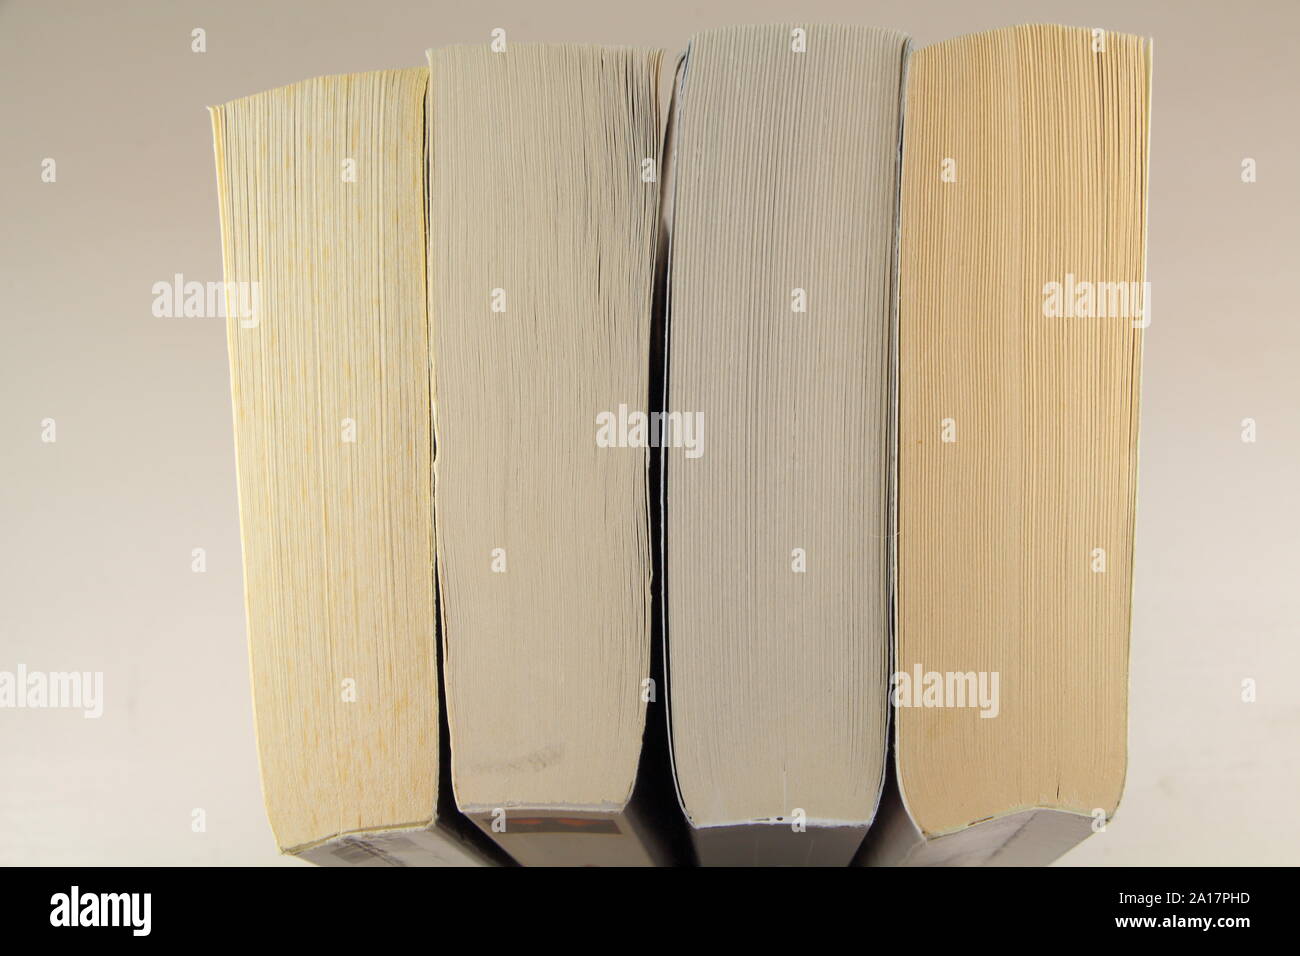 View on the top of four paperbacks on a table Stock Photo